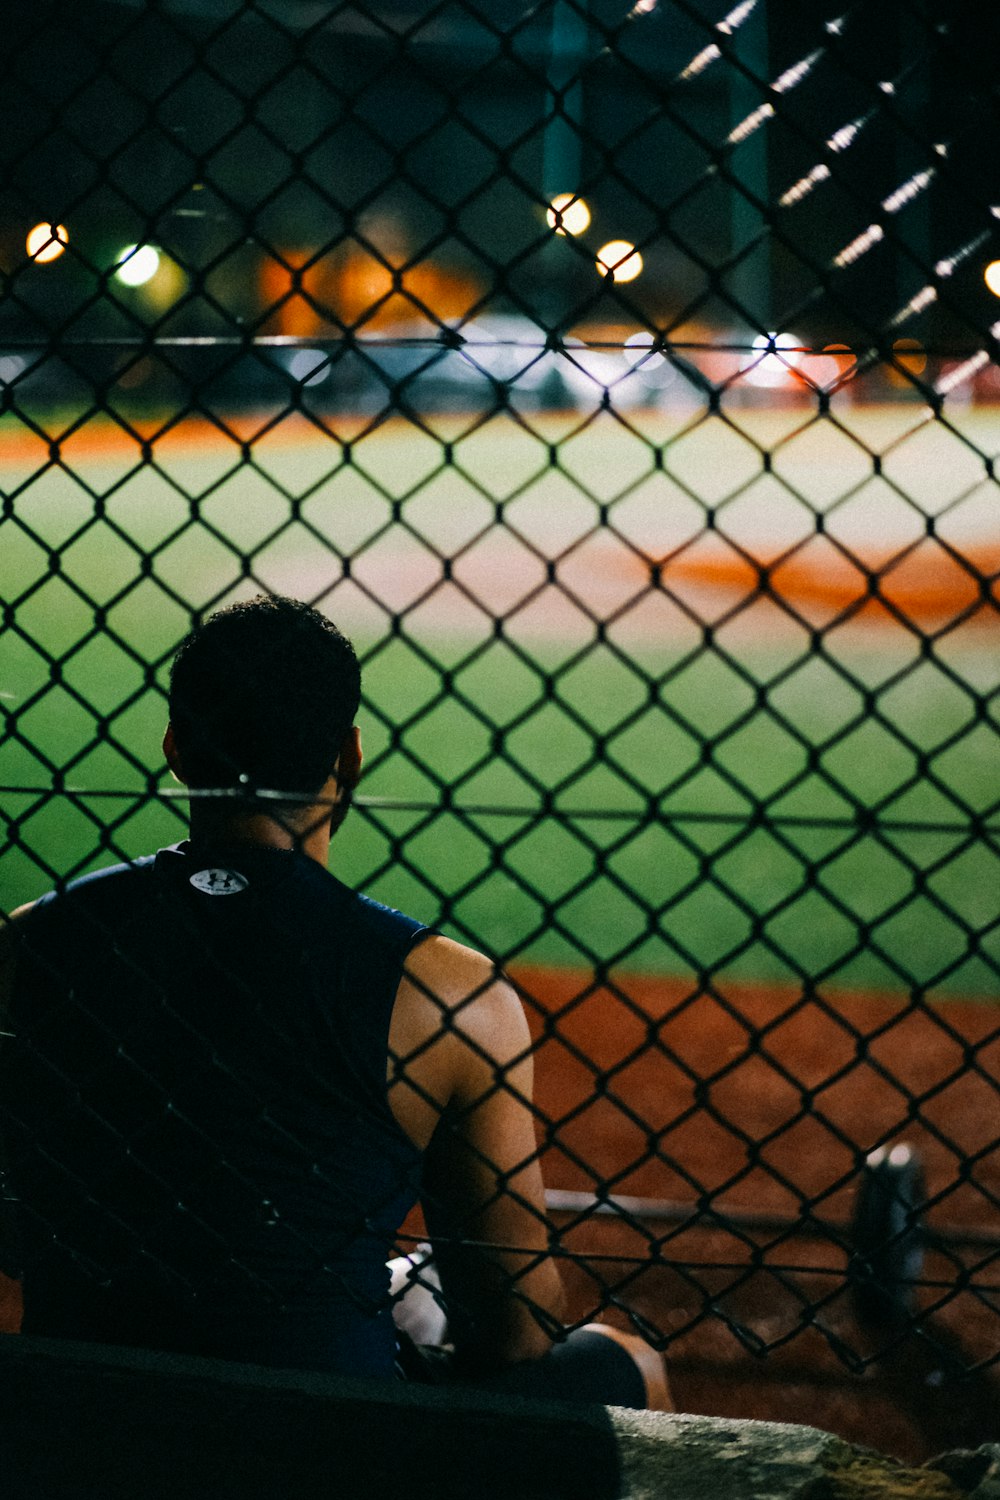 a man sitting on a bench watching a baseball game